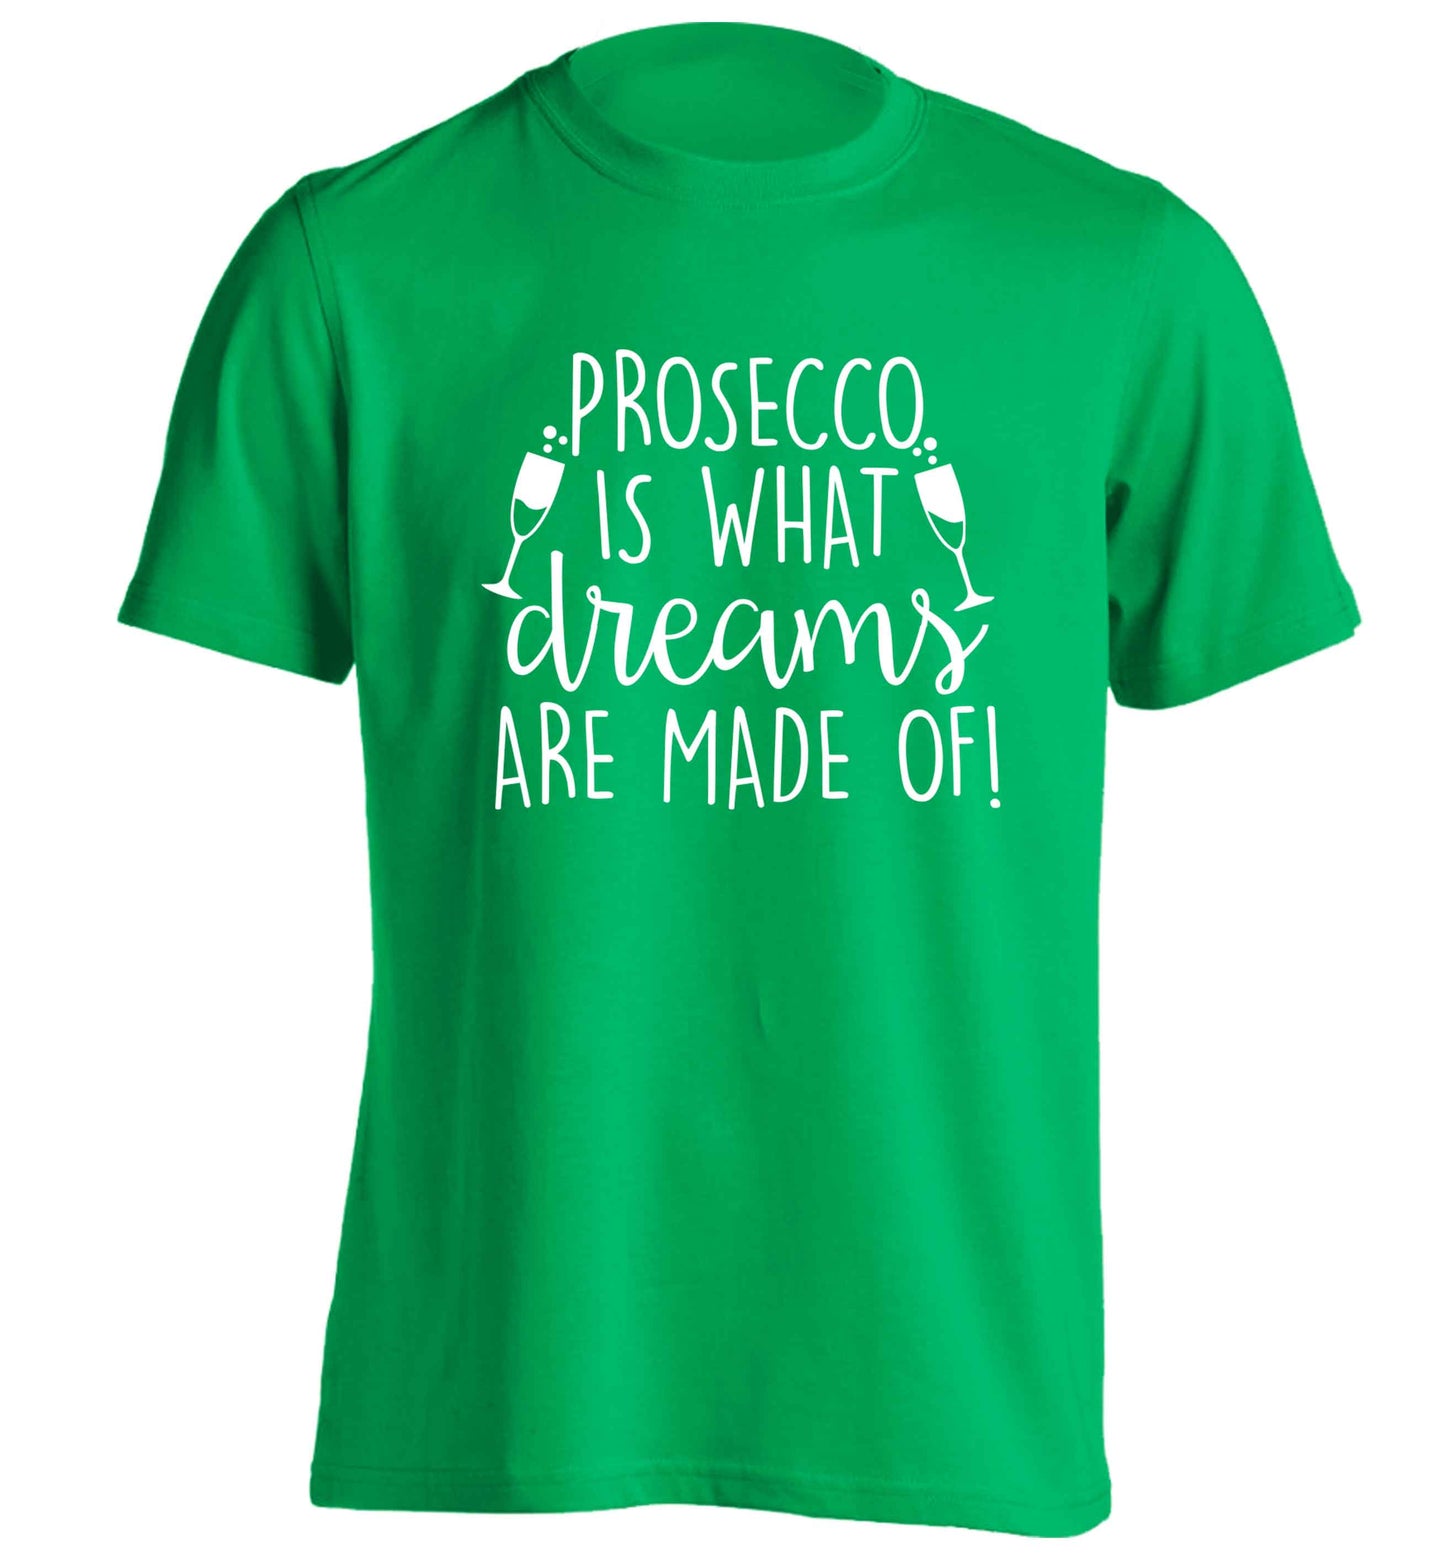 Prosecco is what dreams are made of adults unisex green Tshirt 2XL